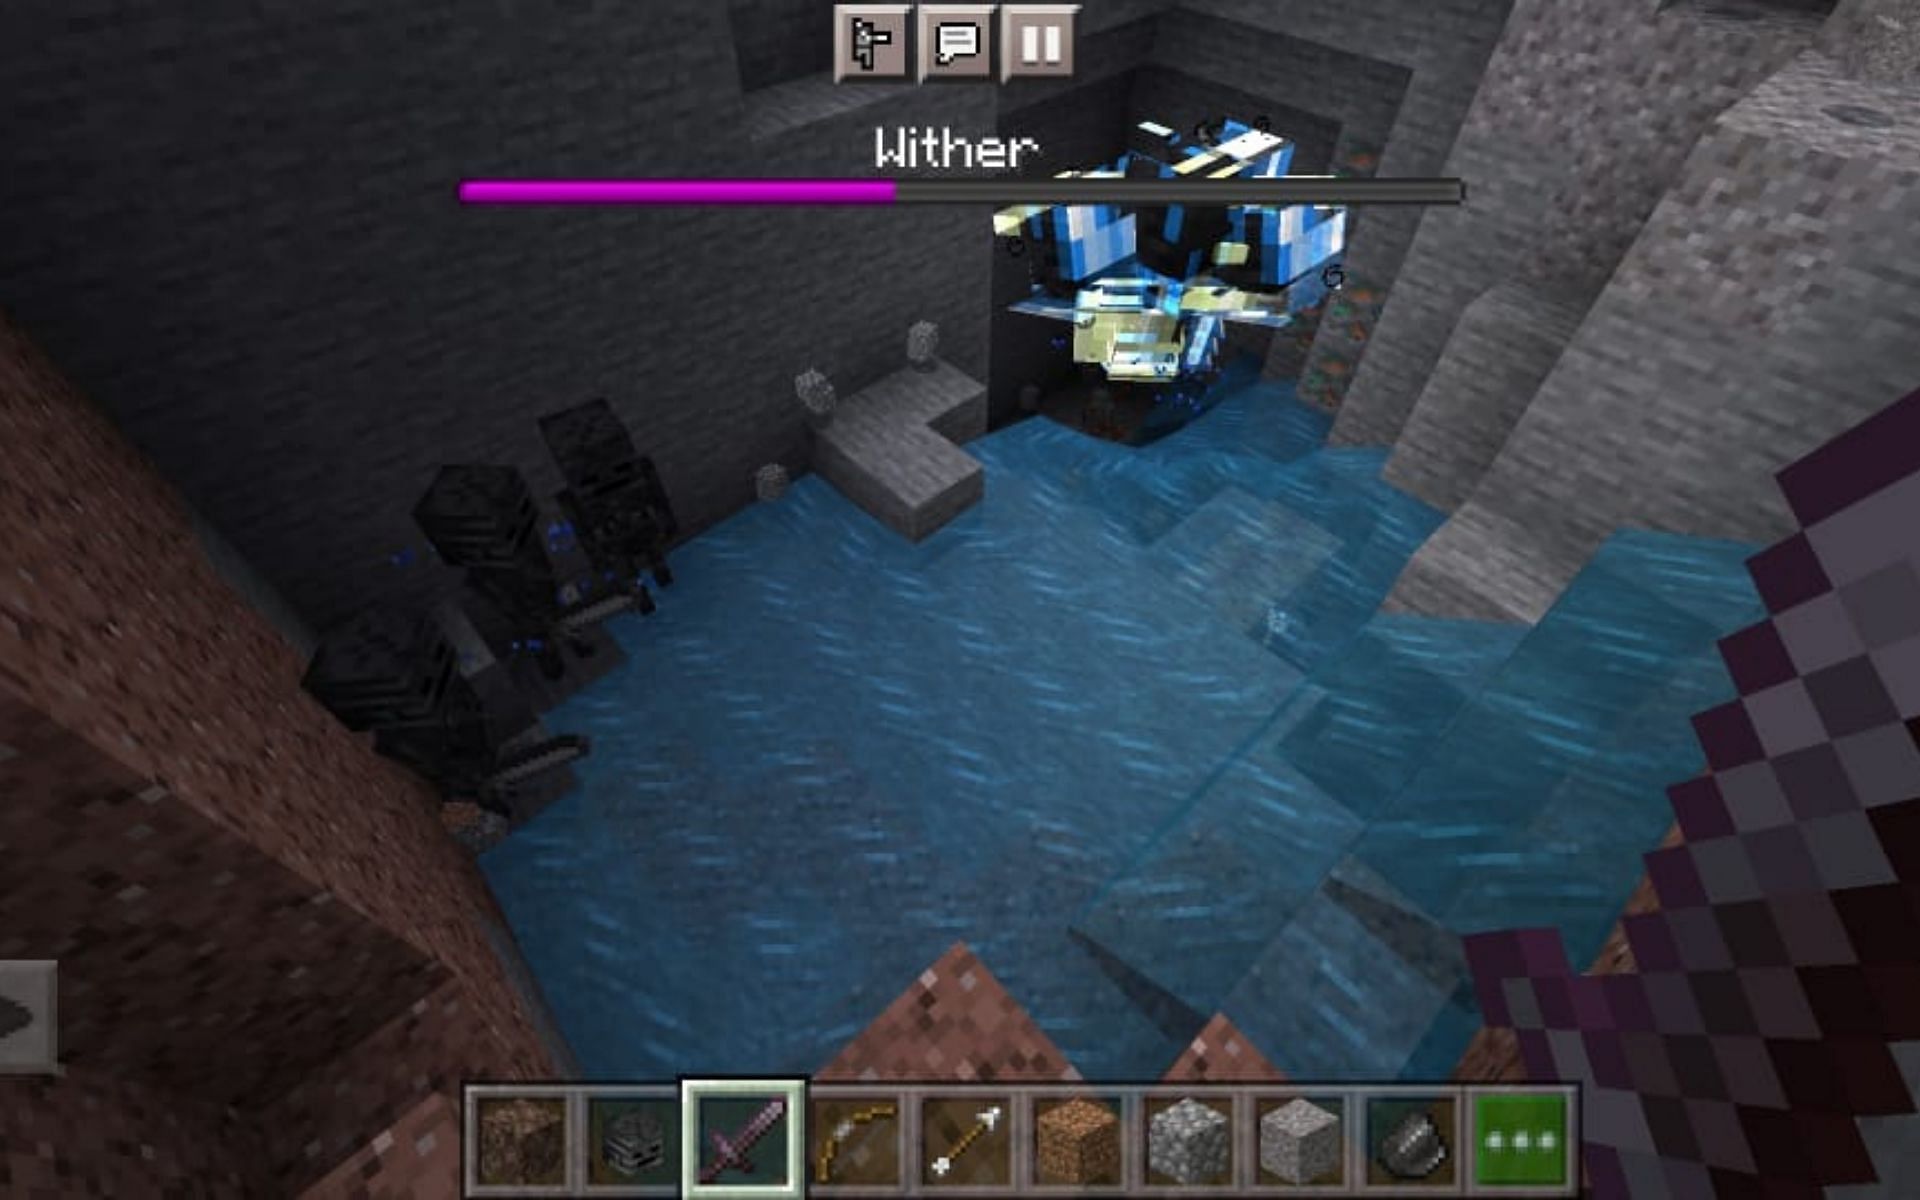 Wither Skeleton being summoned by Wither (Image via Minecraft)